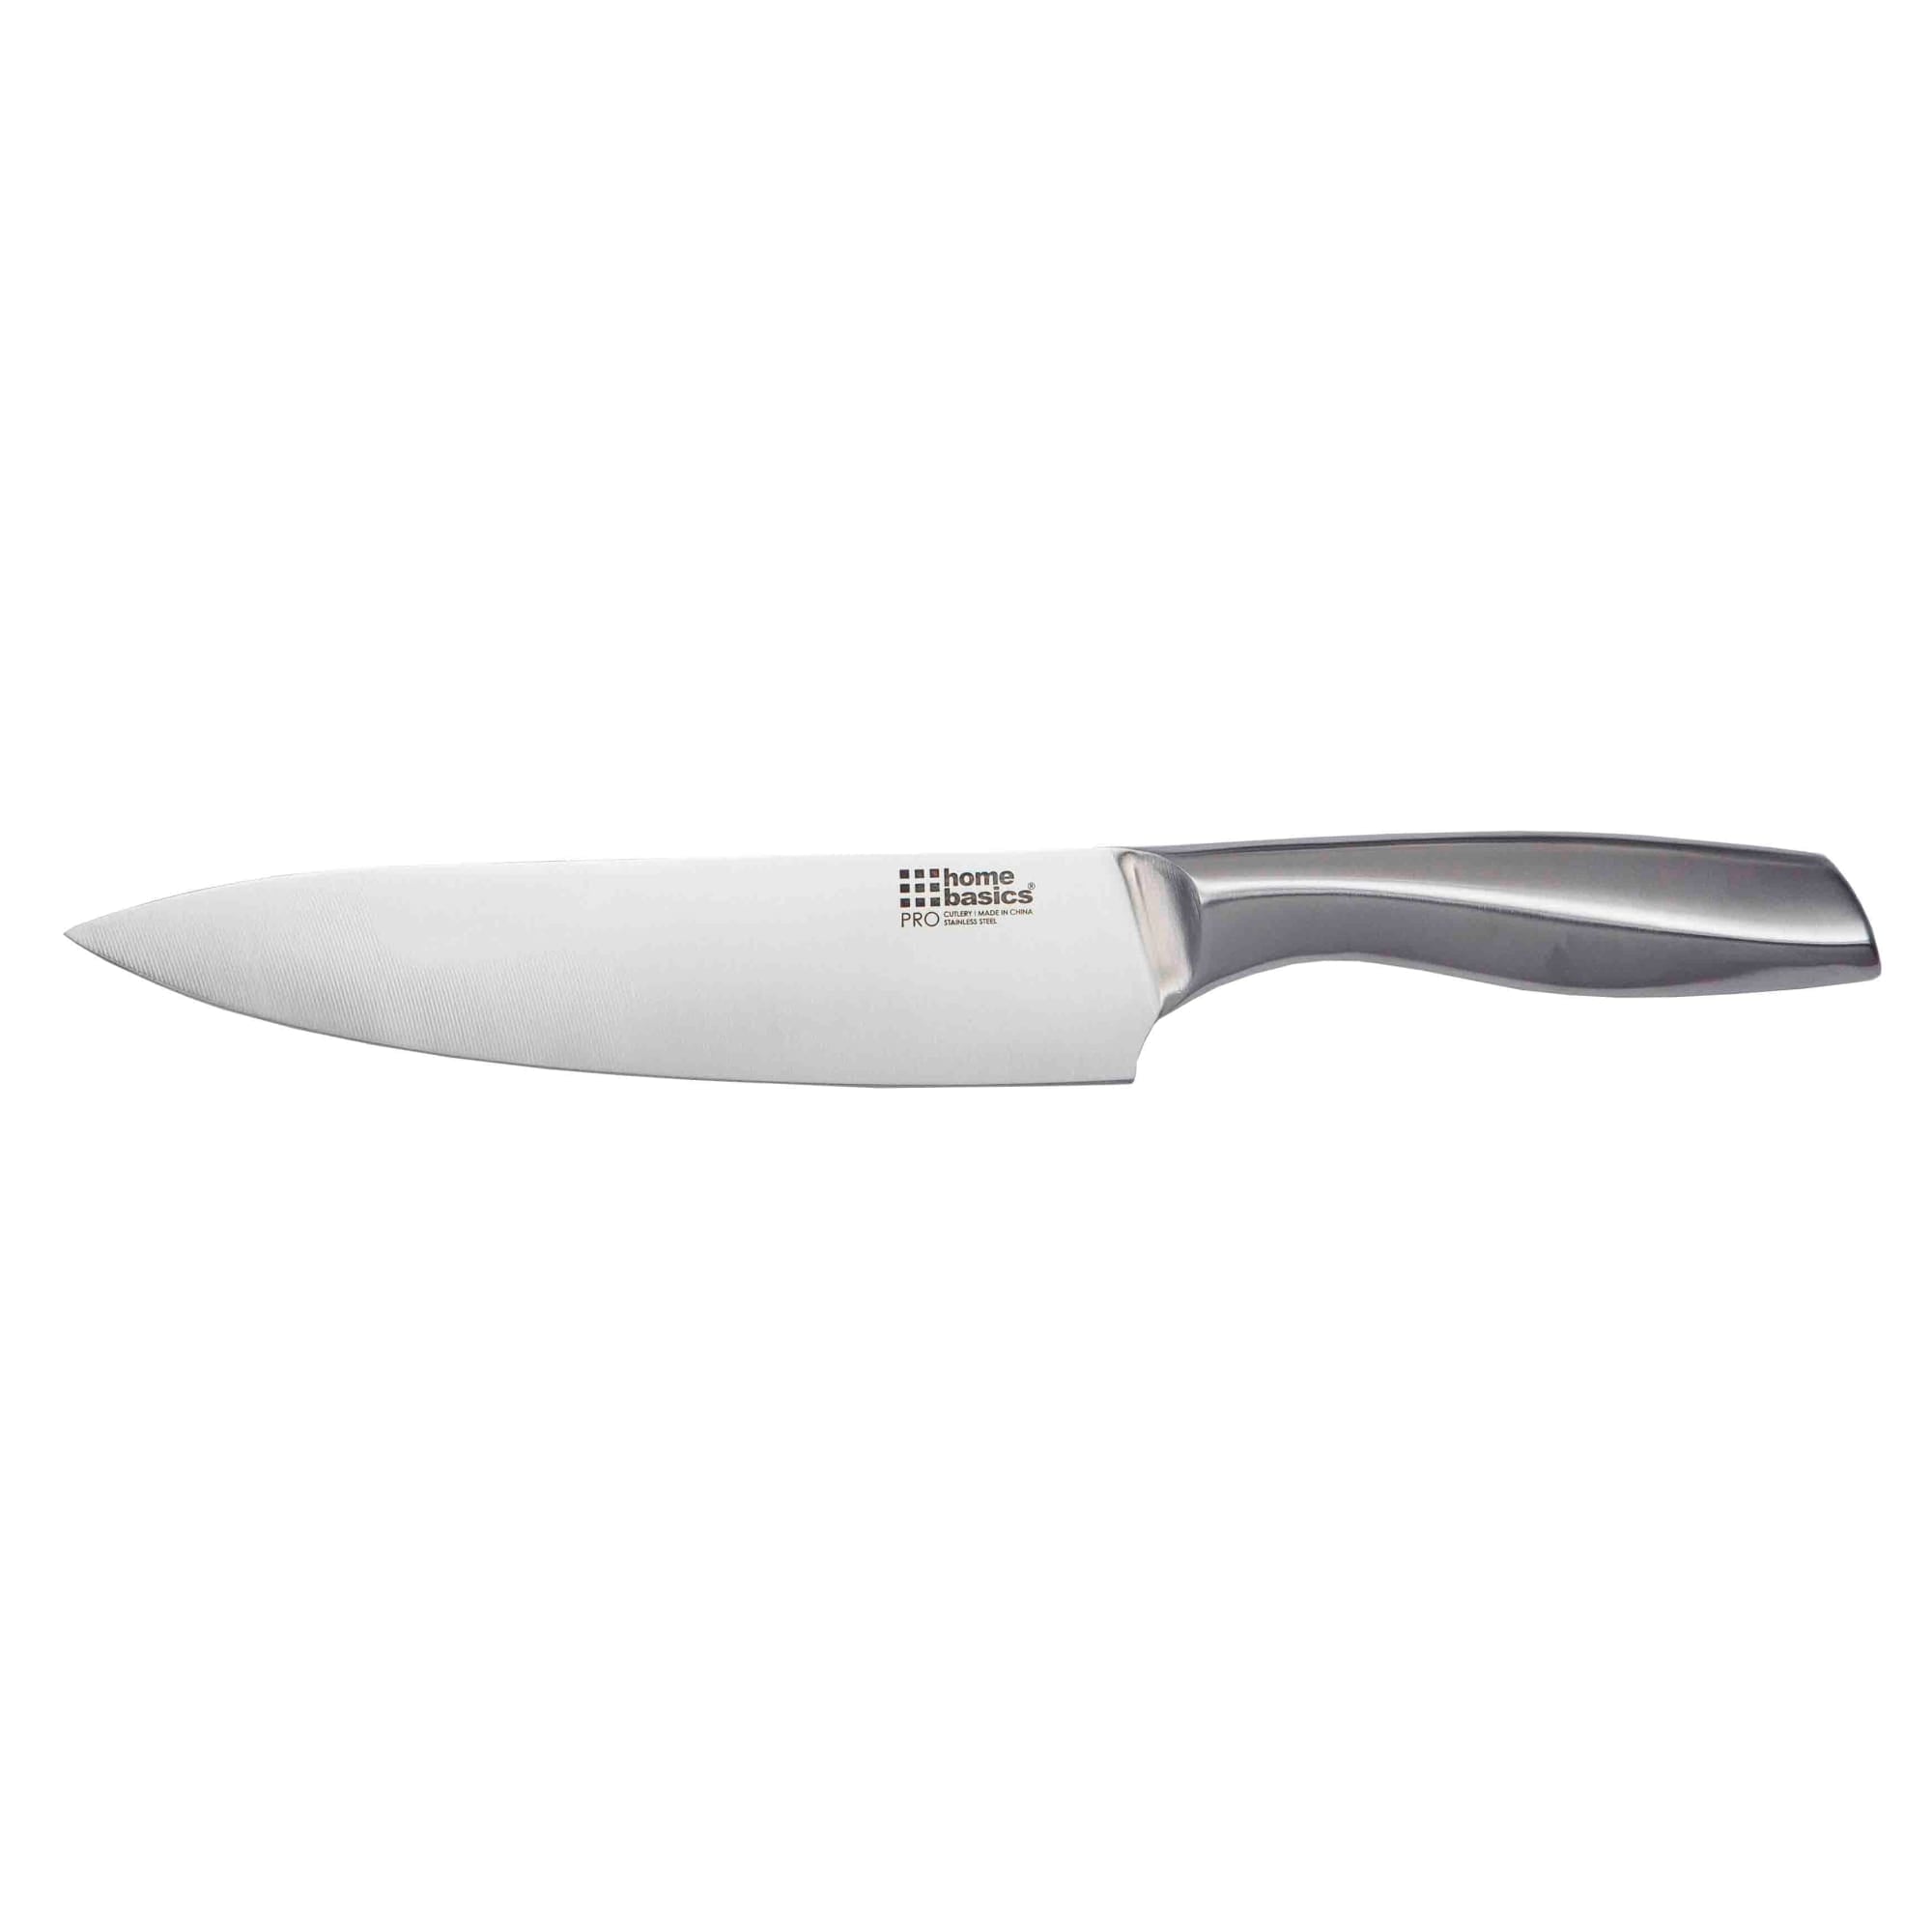 Home Basics 8" Stainless Steel Chef Knife with Handle $5.00 EACH, CASE PACK OF 24